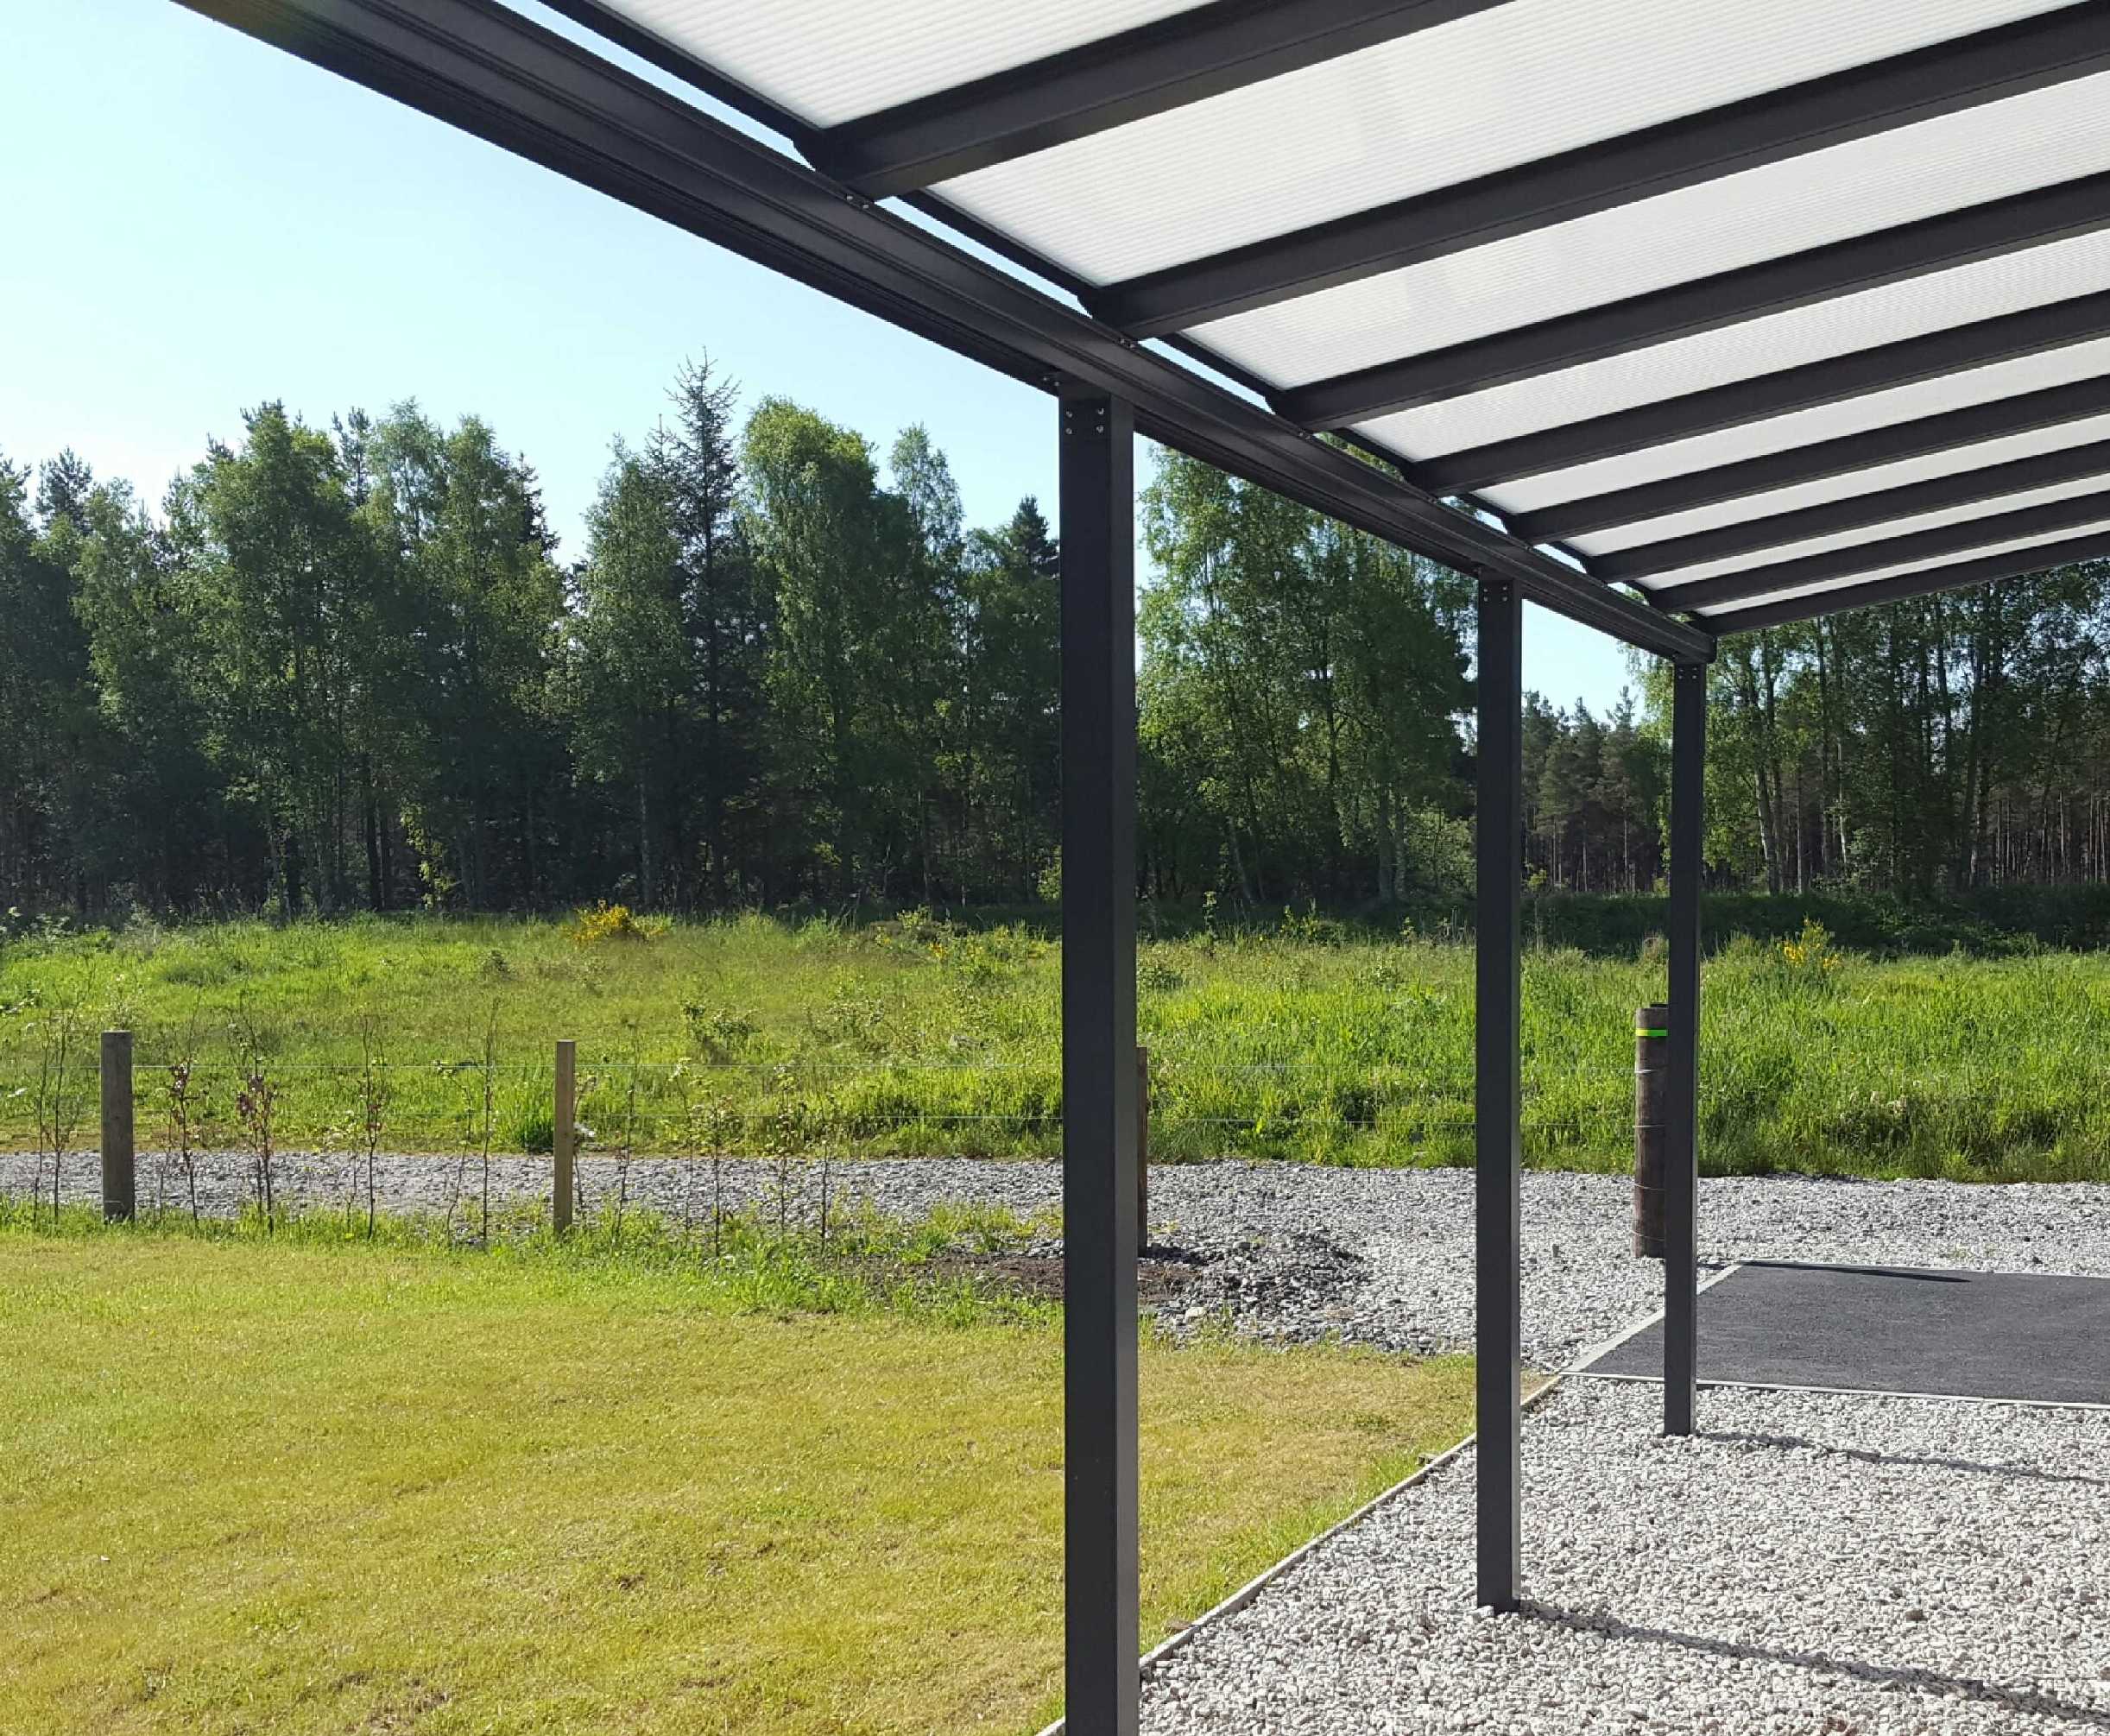 Omega Smart Lean-To Canopy, Anthracite Grey, 16mm Polycarbonate Glazing - 9.2m (W) x 4.0m (P), (5) Supporting Posts